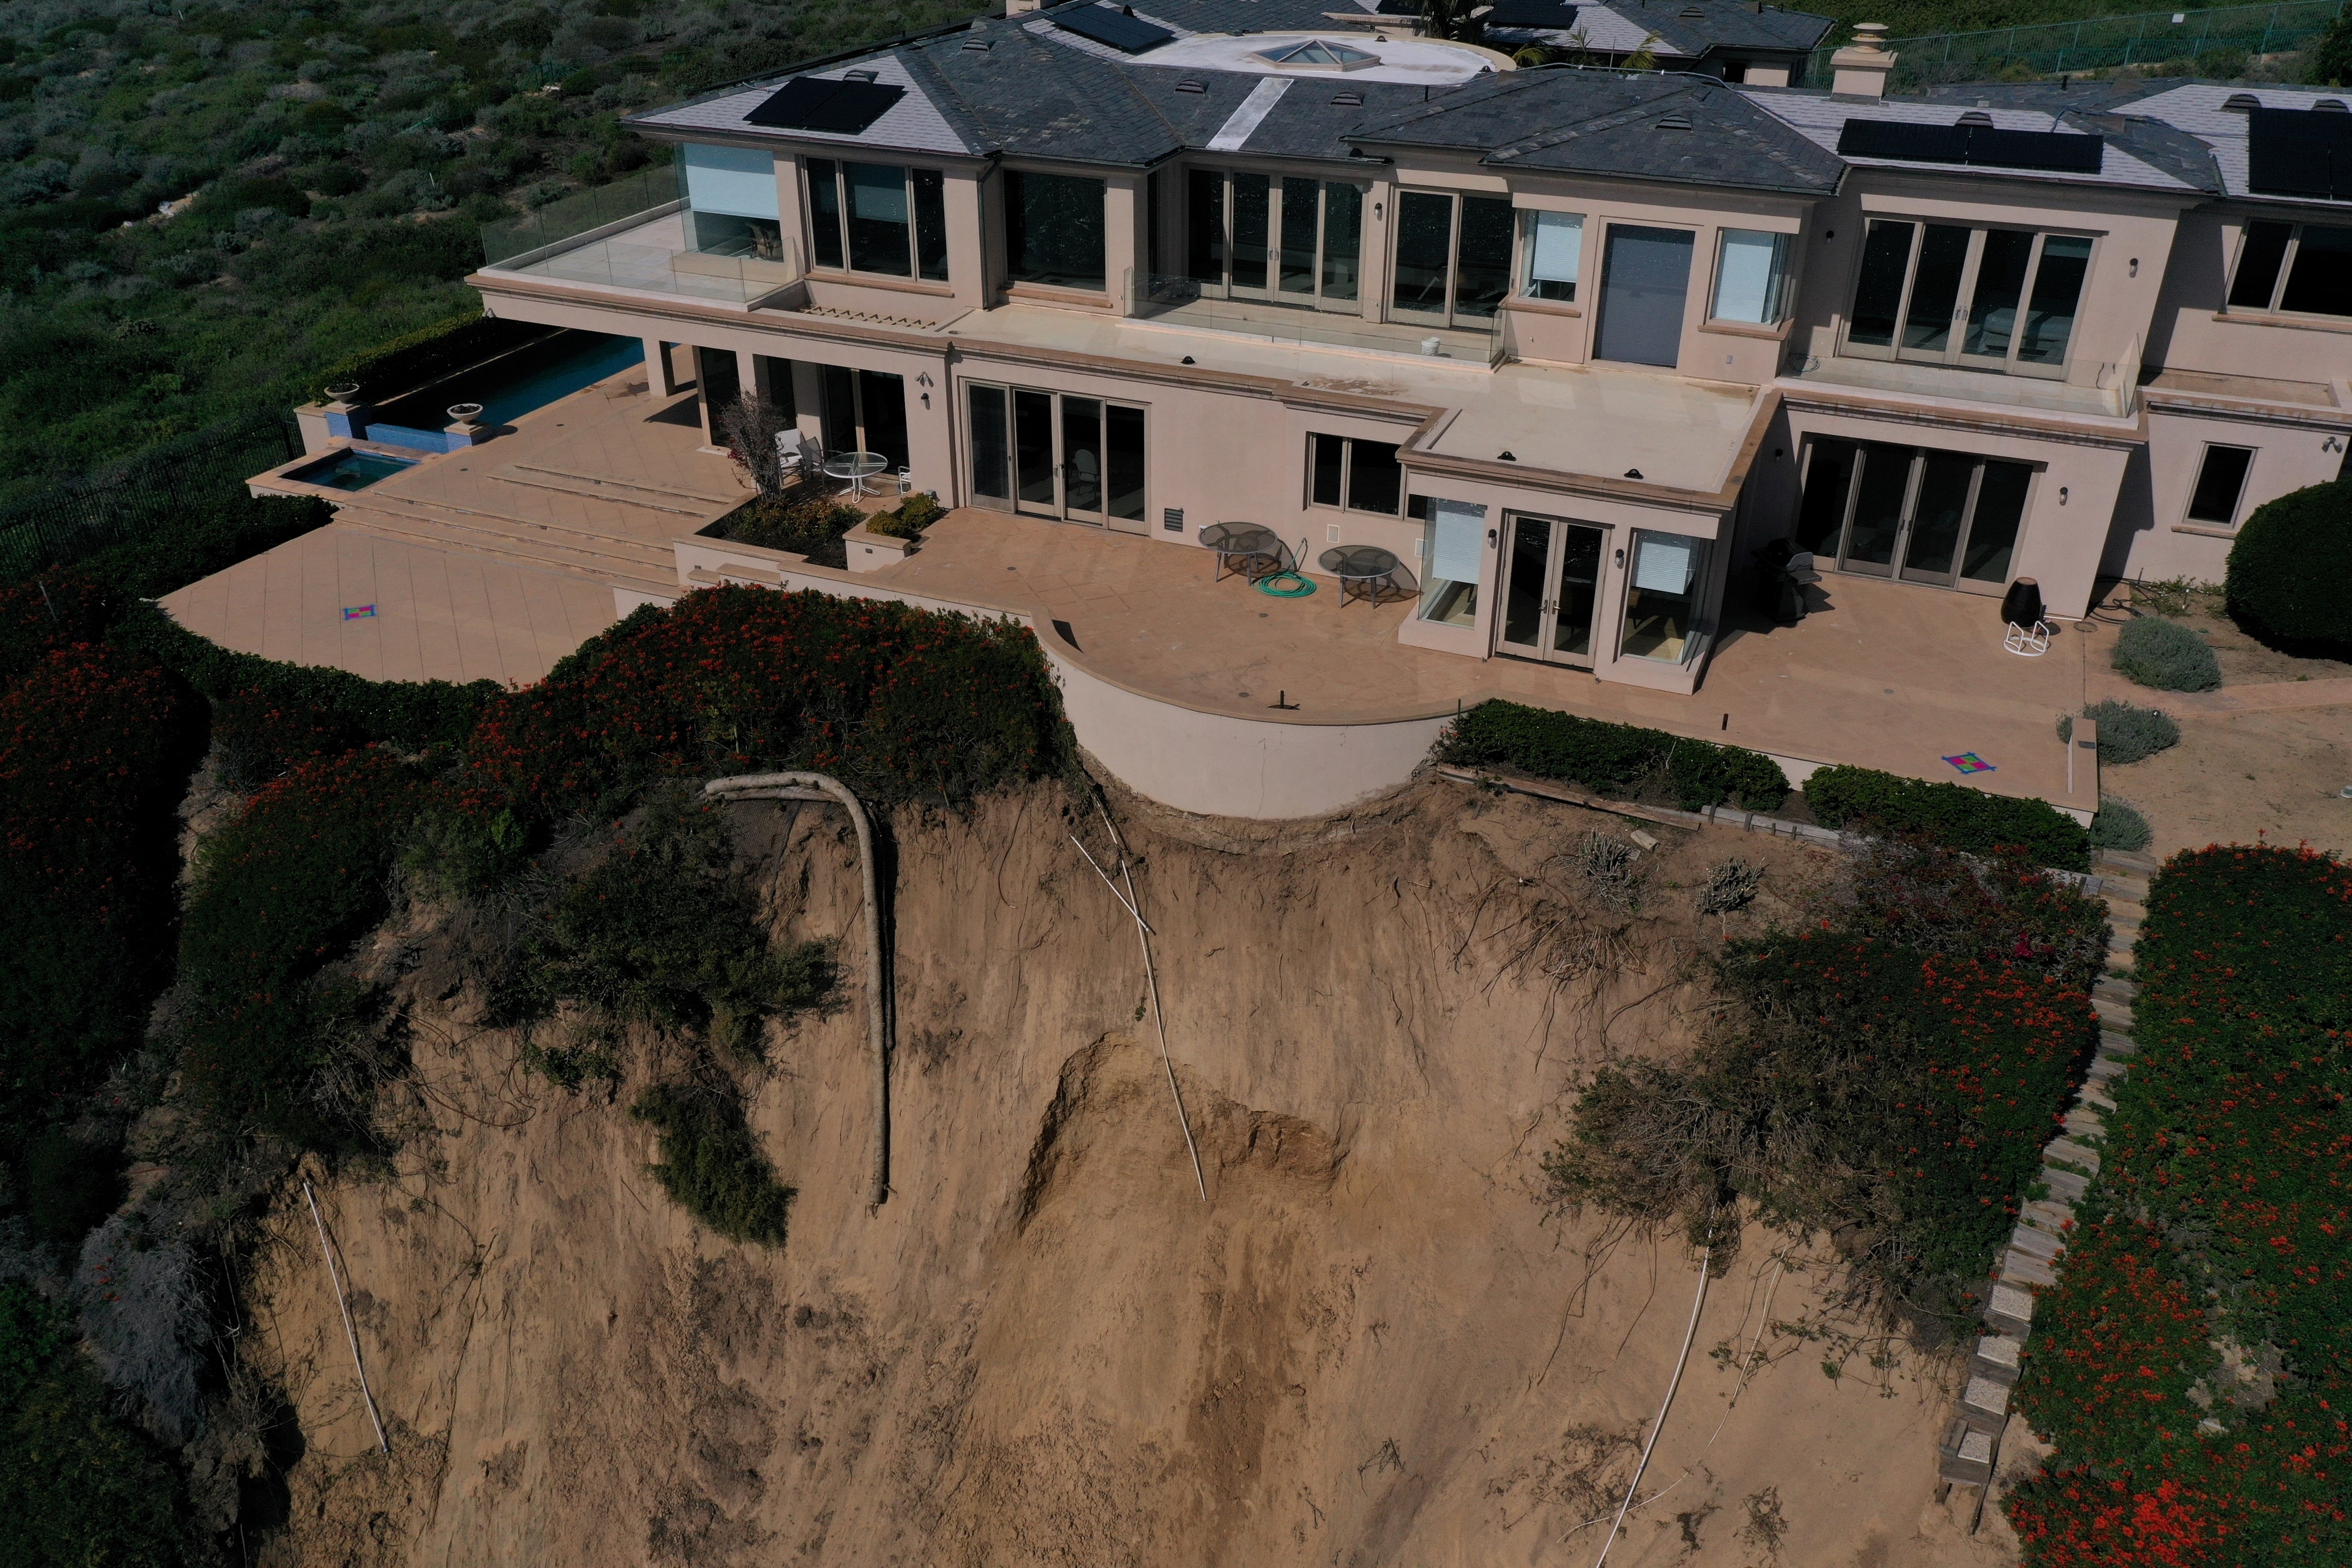 Aerial view of a large house perched on the edge of an eroded cliff